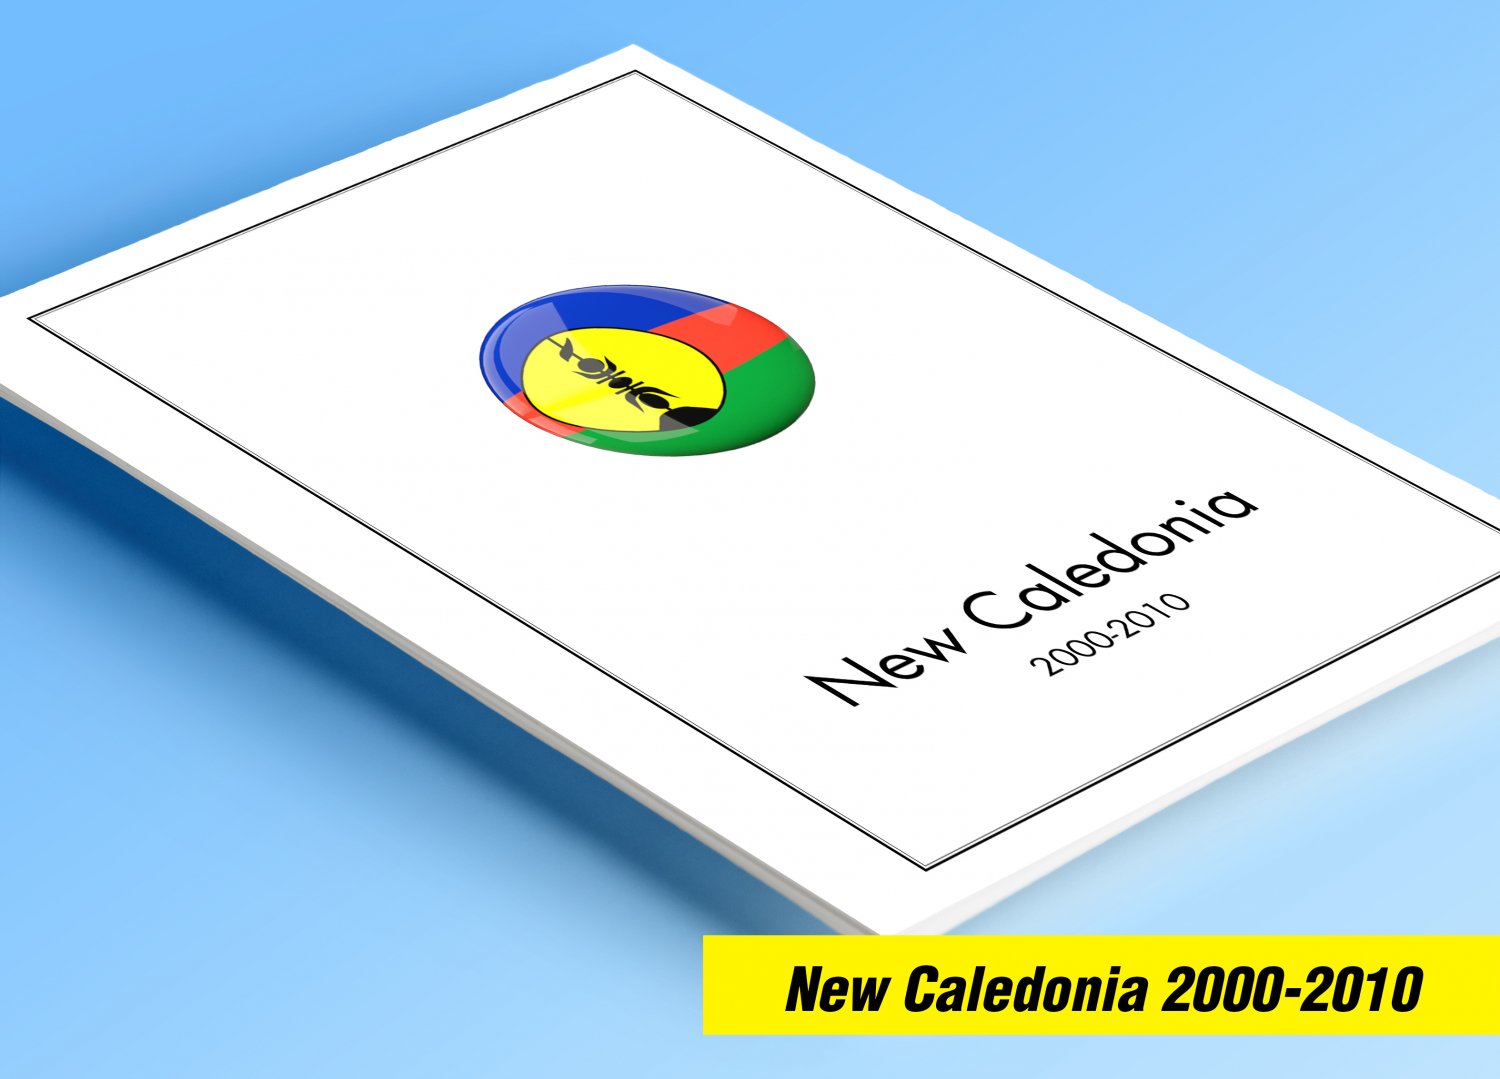 COLOR PRINTED NEW CALEDONIA 2000-2010 STAMP ALBUM  PAGES (51 illustrated pages)